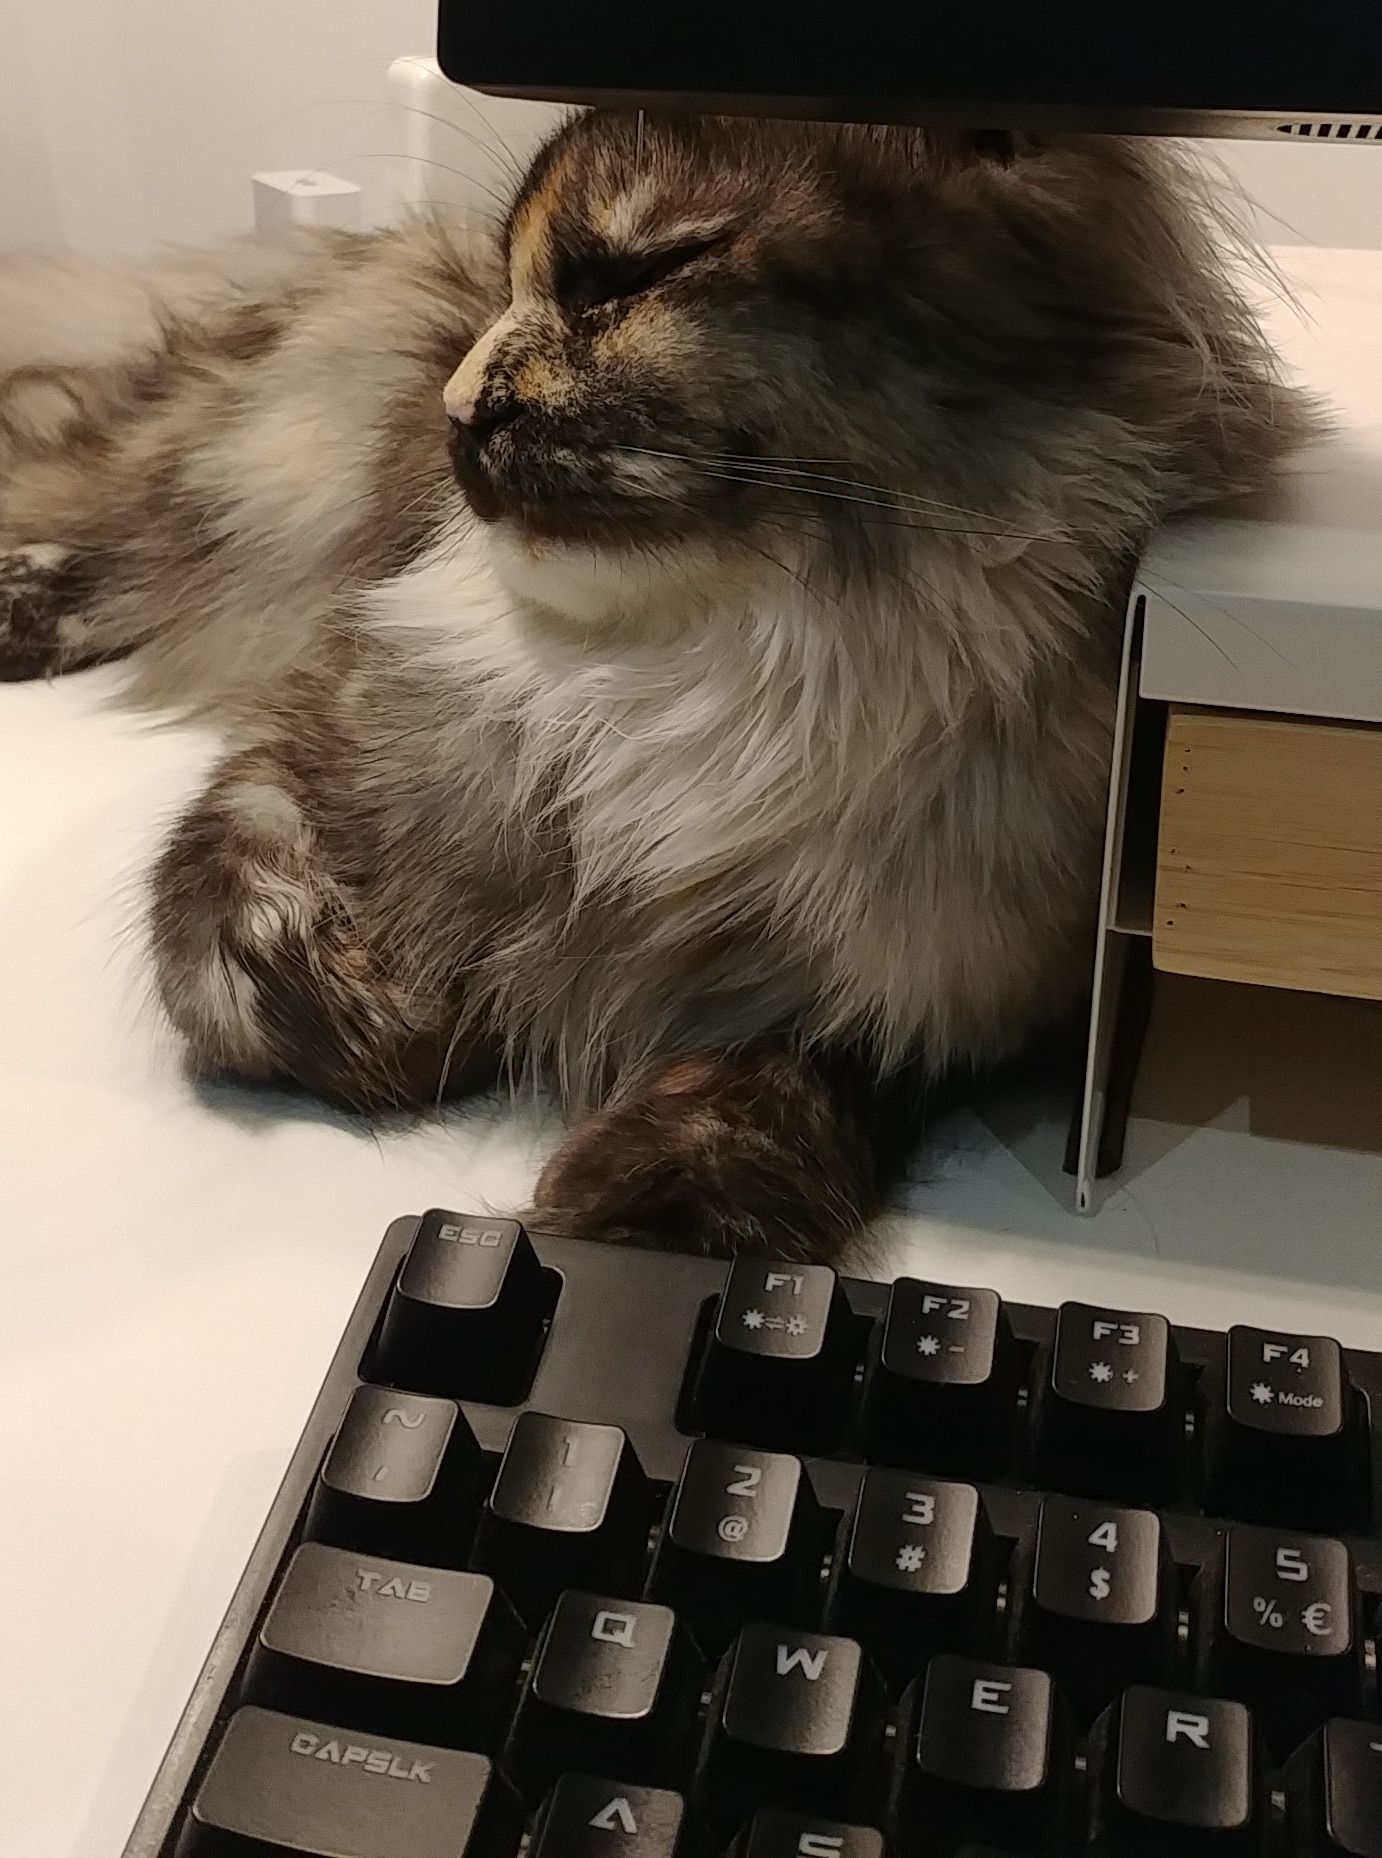 Obligatory cat next to my old keyboard